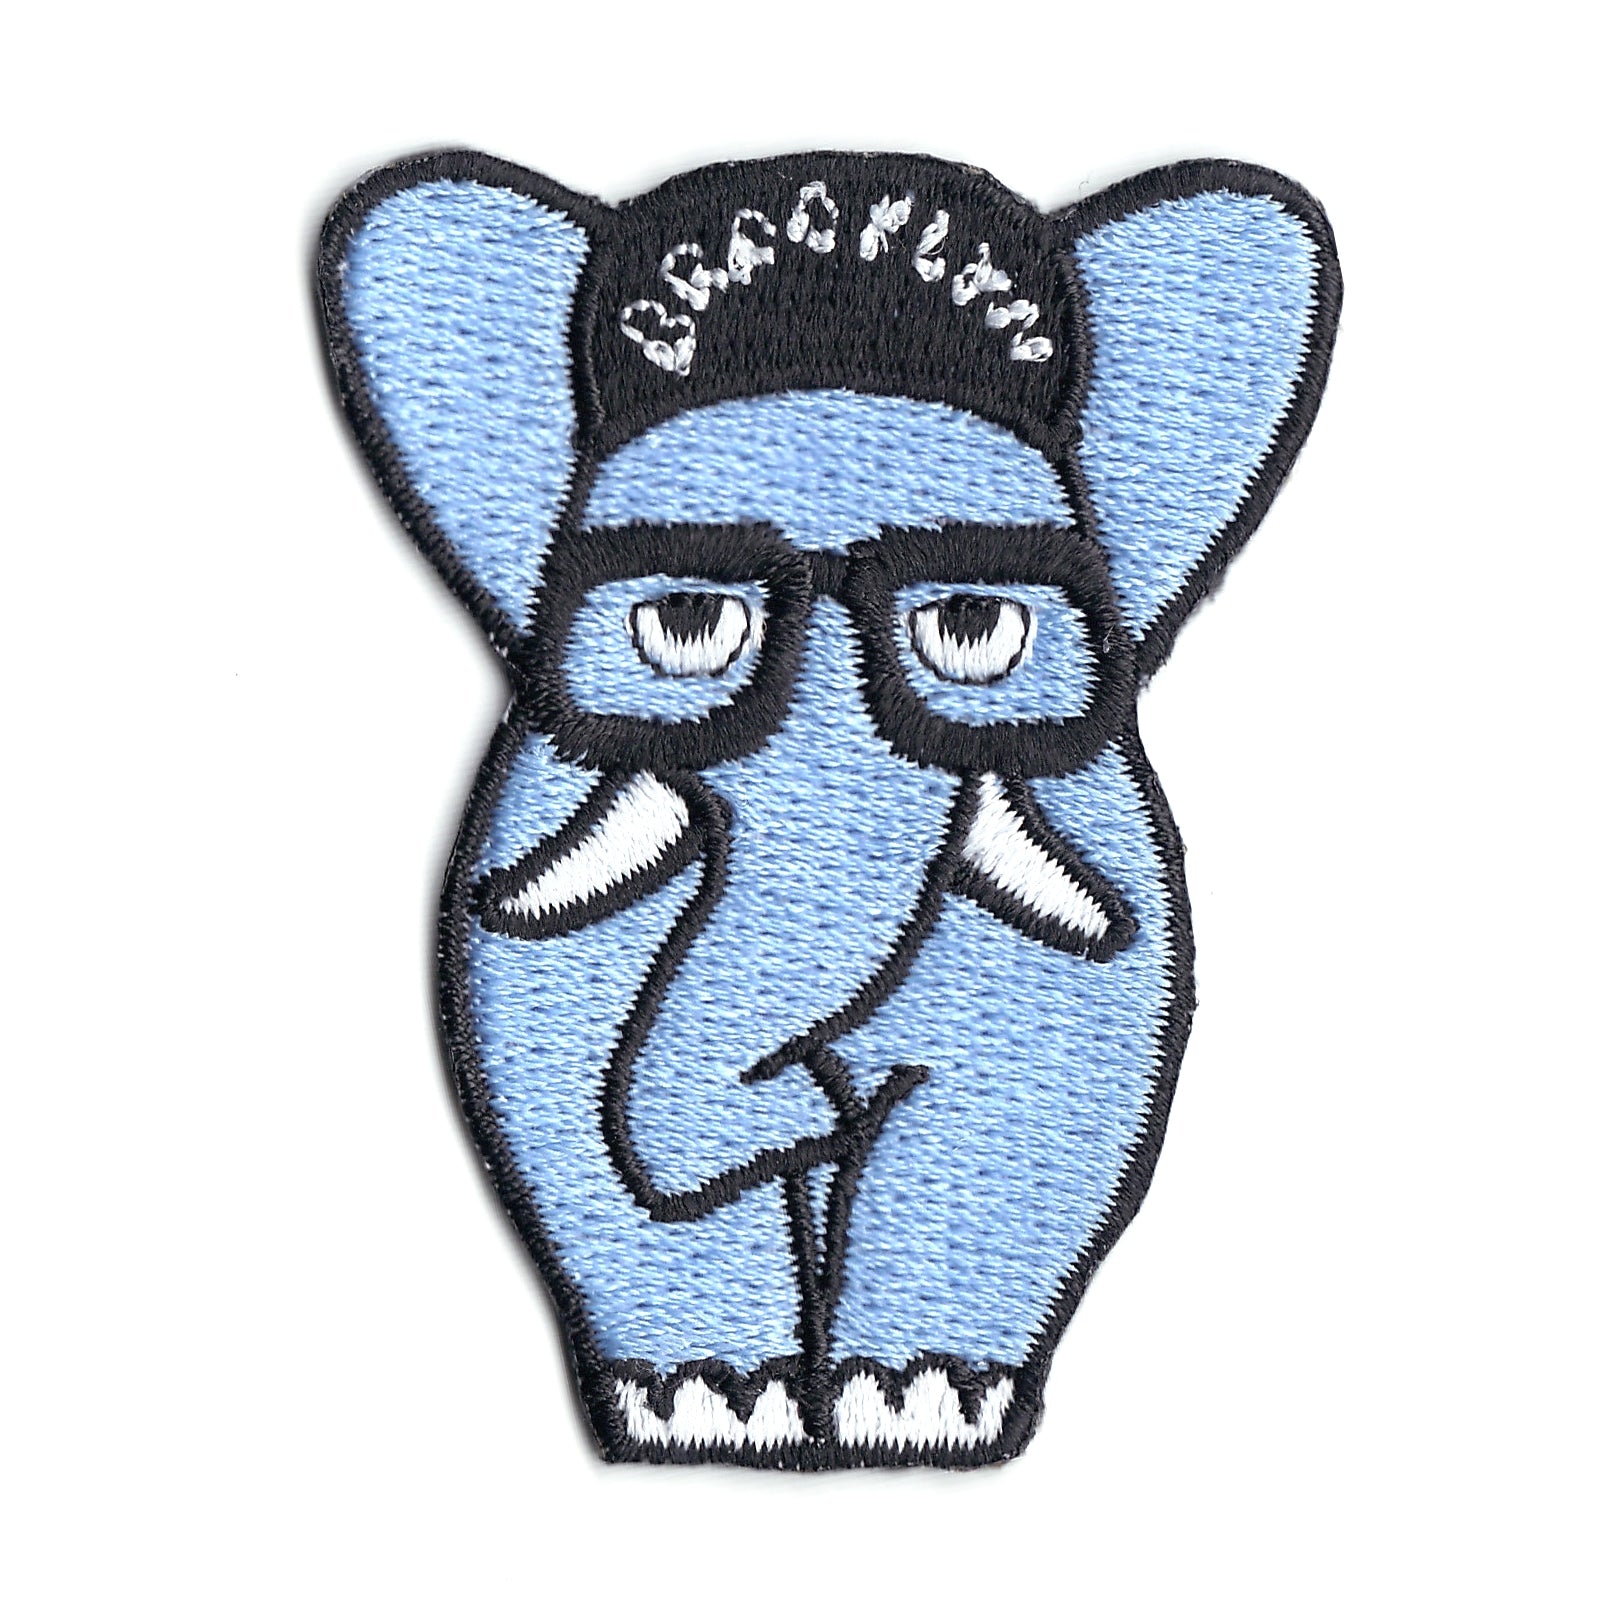 Brooklyn Basketball Player "The Elephant" Iron on Patch 